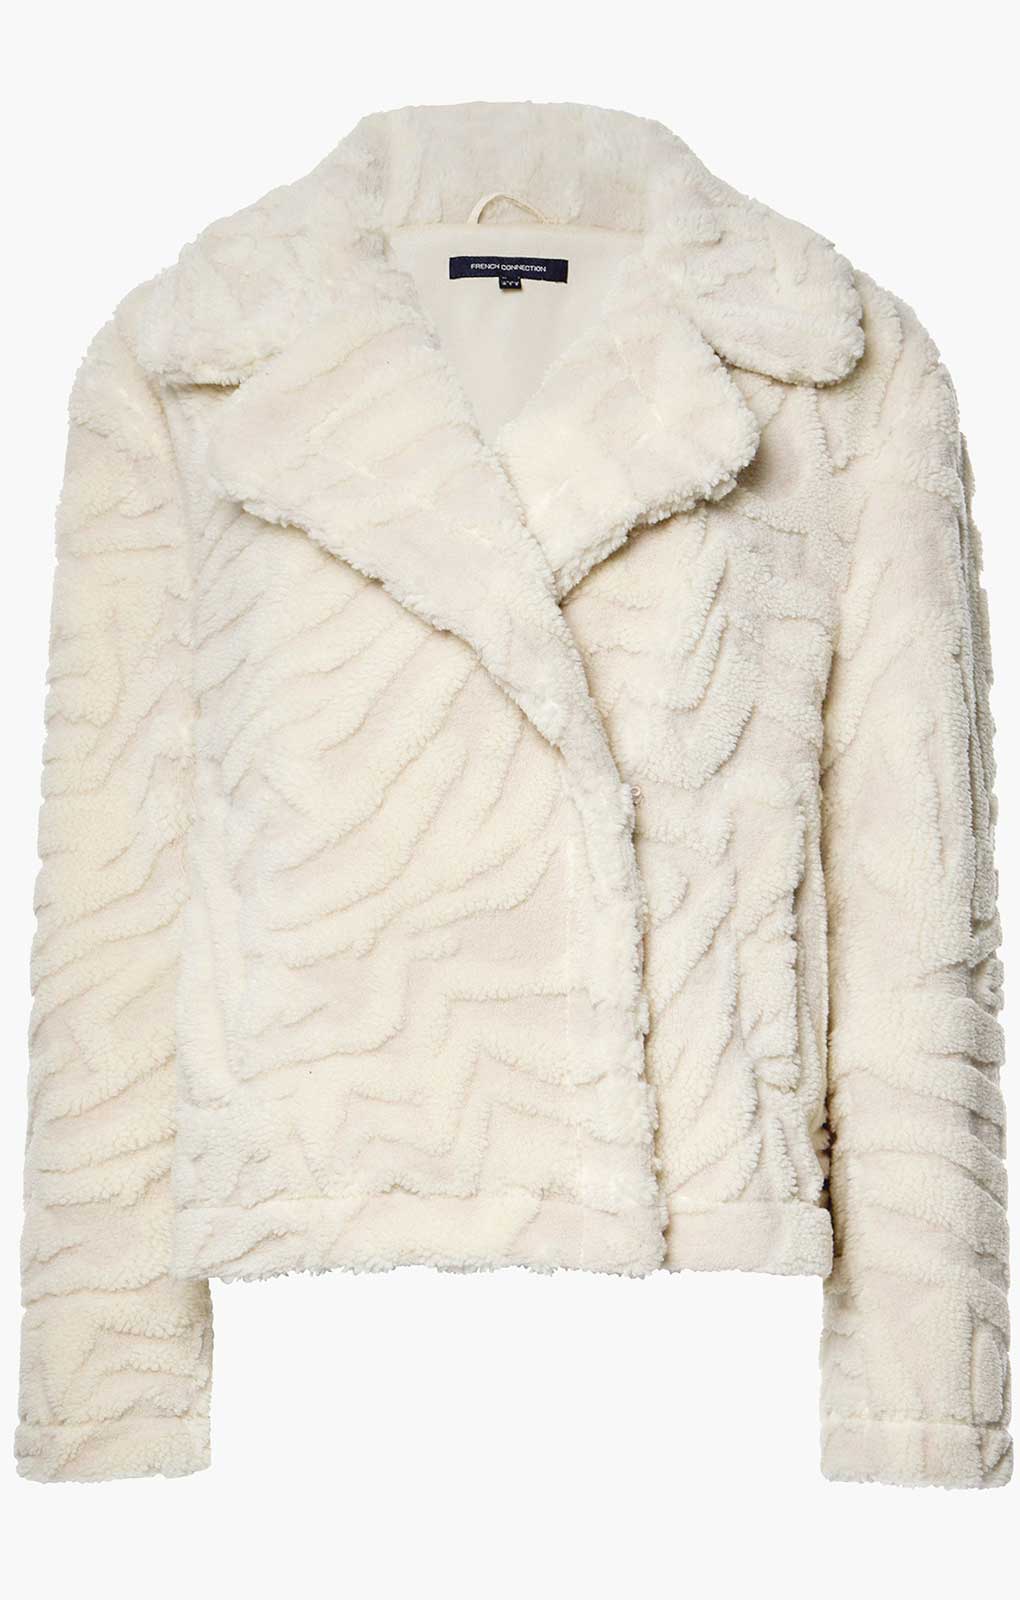 French Connection Bobby Borg Cropped Jacket in Cream product image